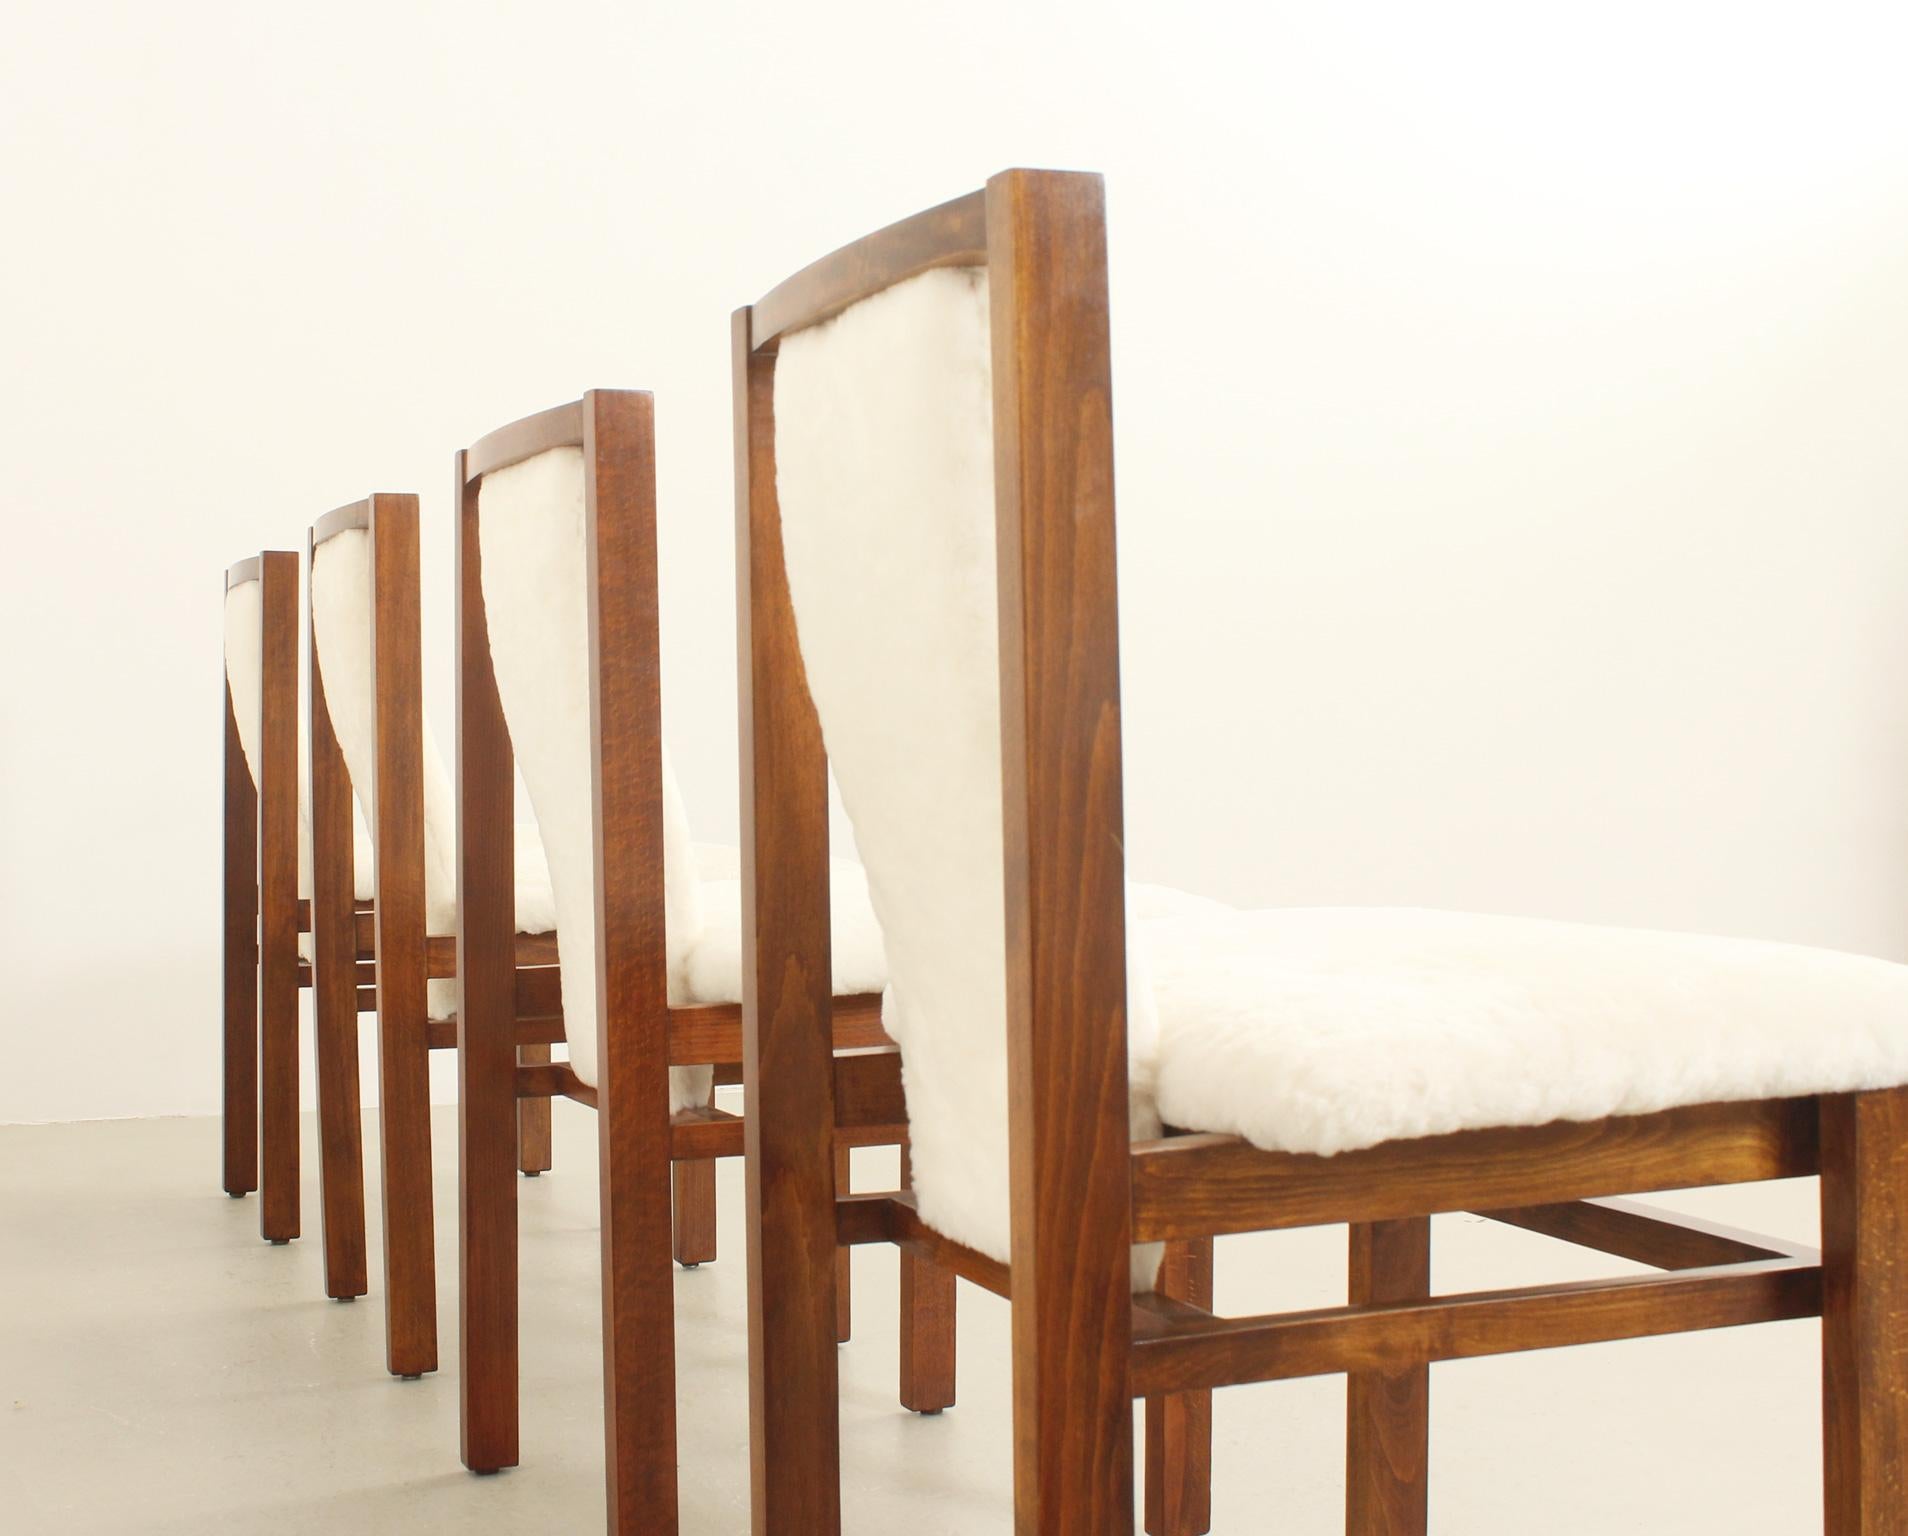 Four Dining Chairs by Jordi Vilanova in Oak Wood and Sheepskin, Spain, 1960's For Sale 1